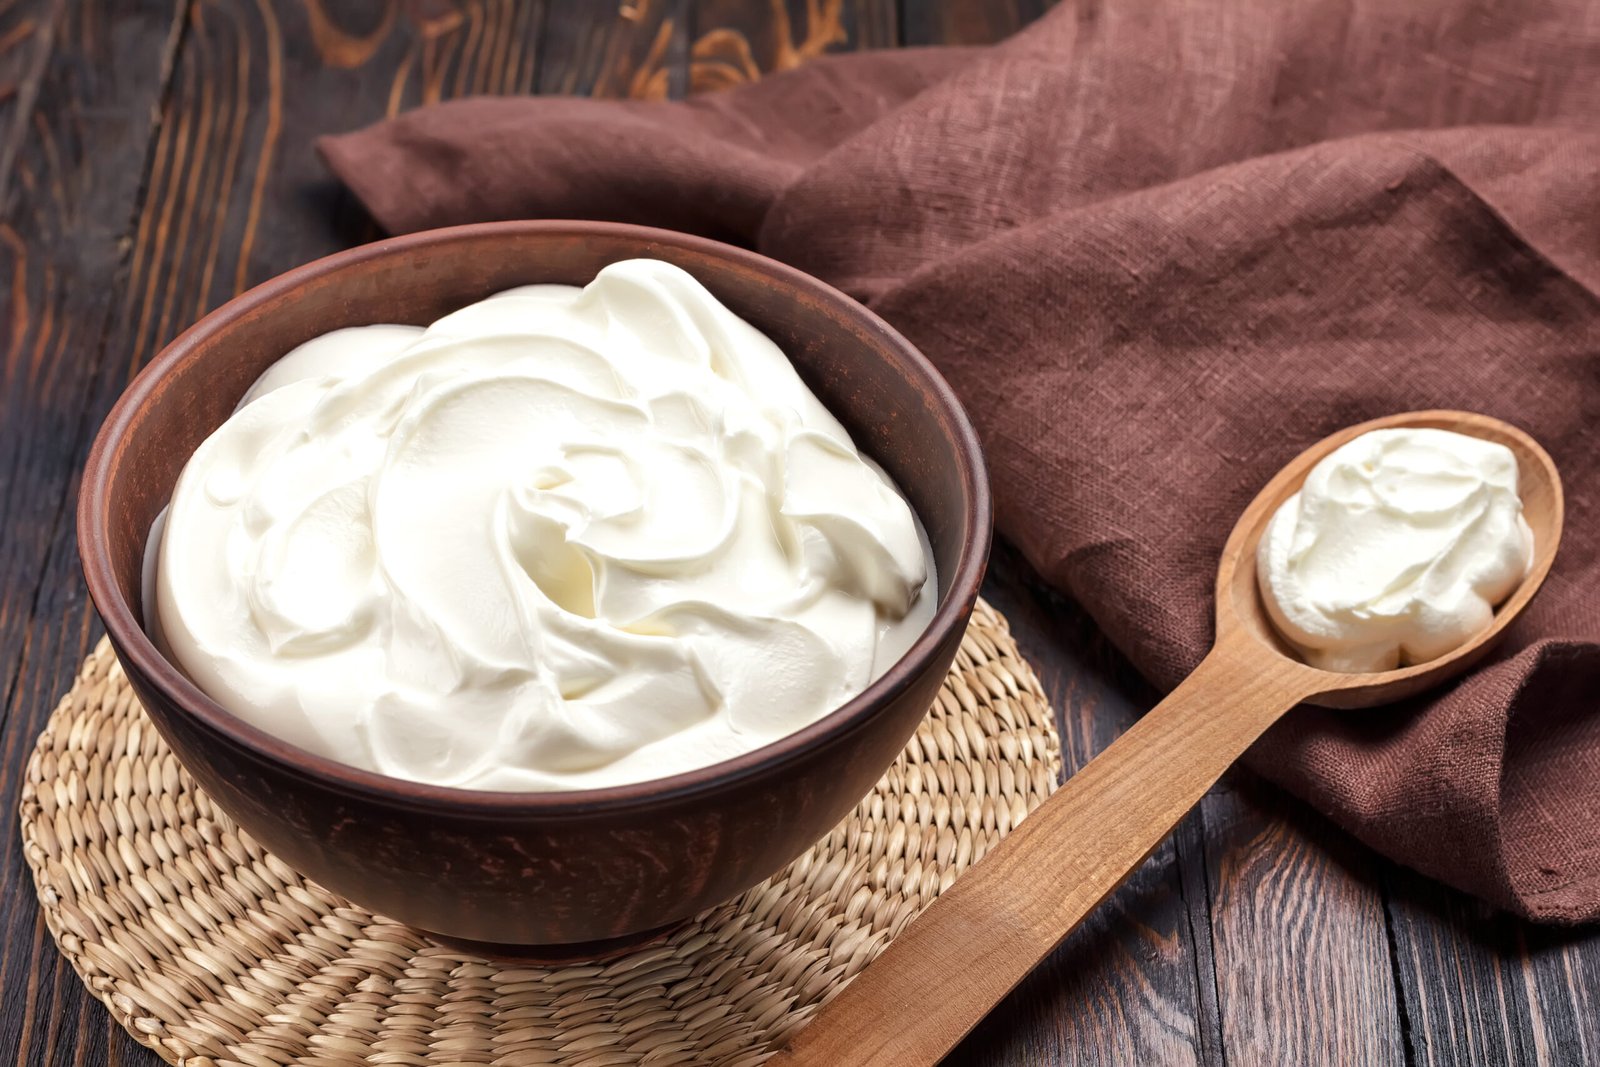 10 Health Benefits of Eating Yoghurt Every Day